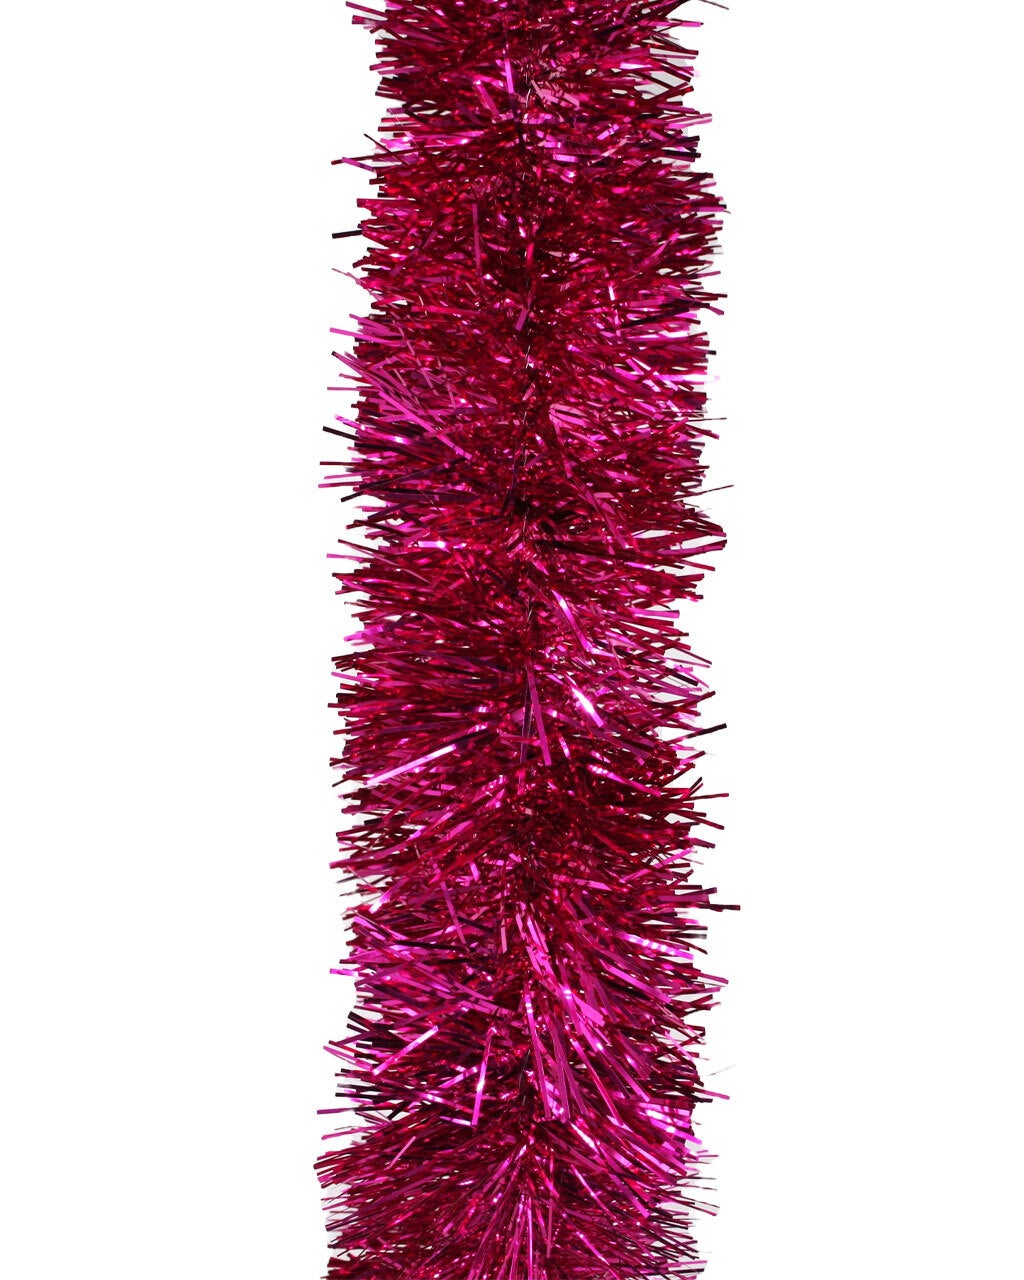 10m HOT PINK Christmas Tinsel 75mm wide